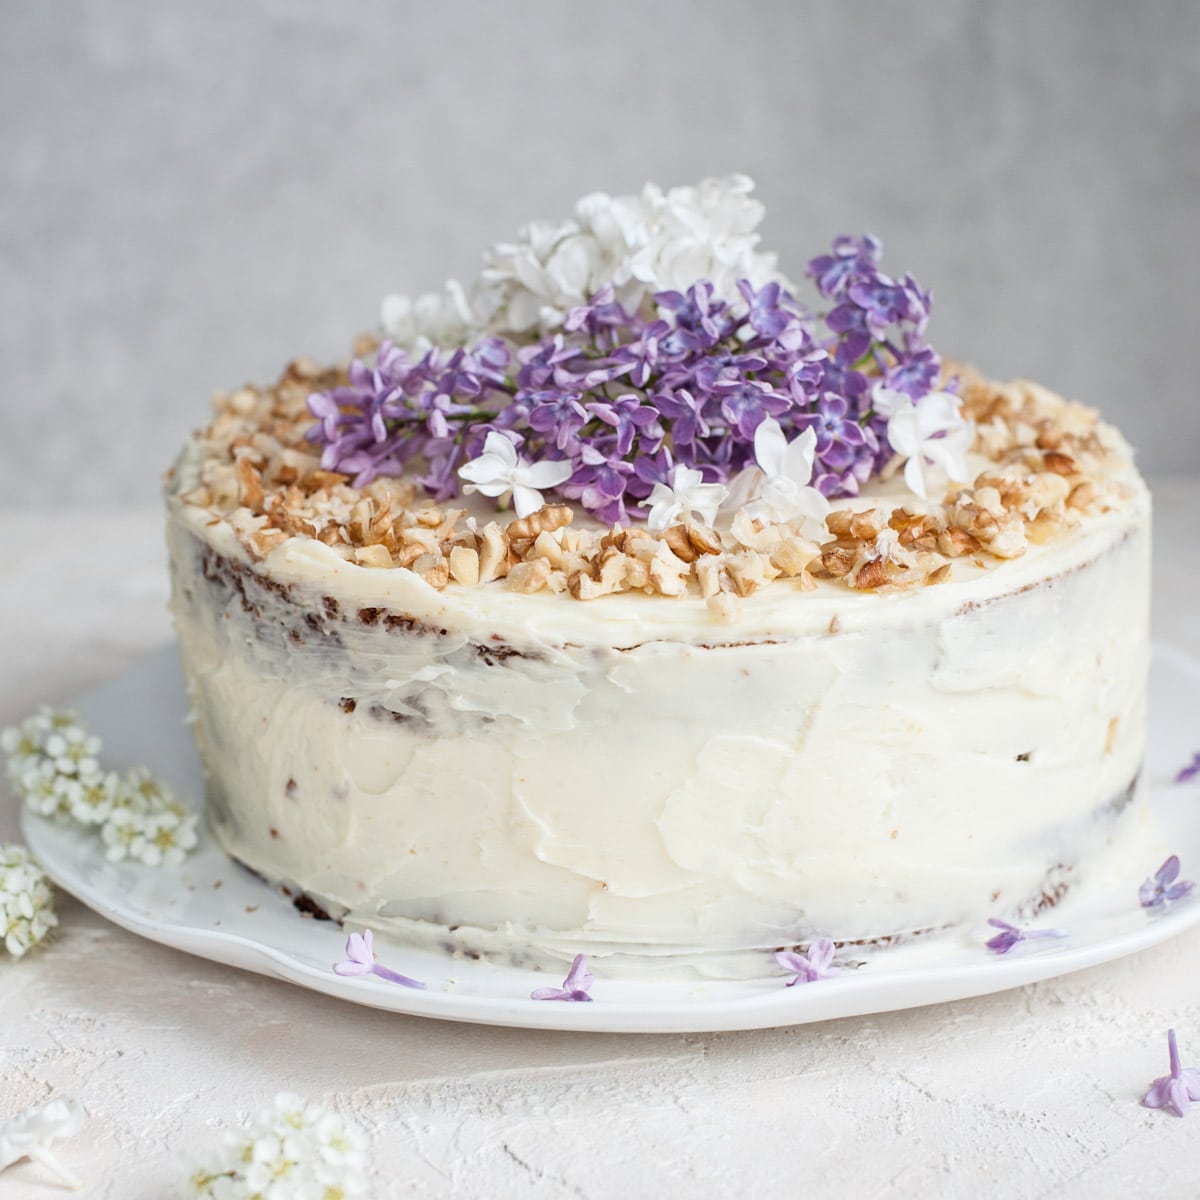 Carrot layer cake topped with walnut and fresh flowers.